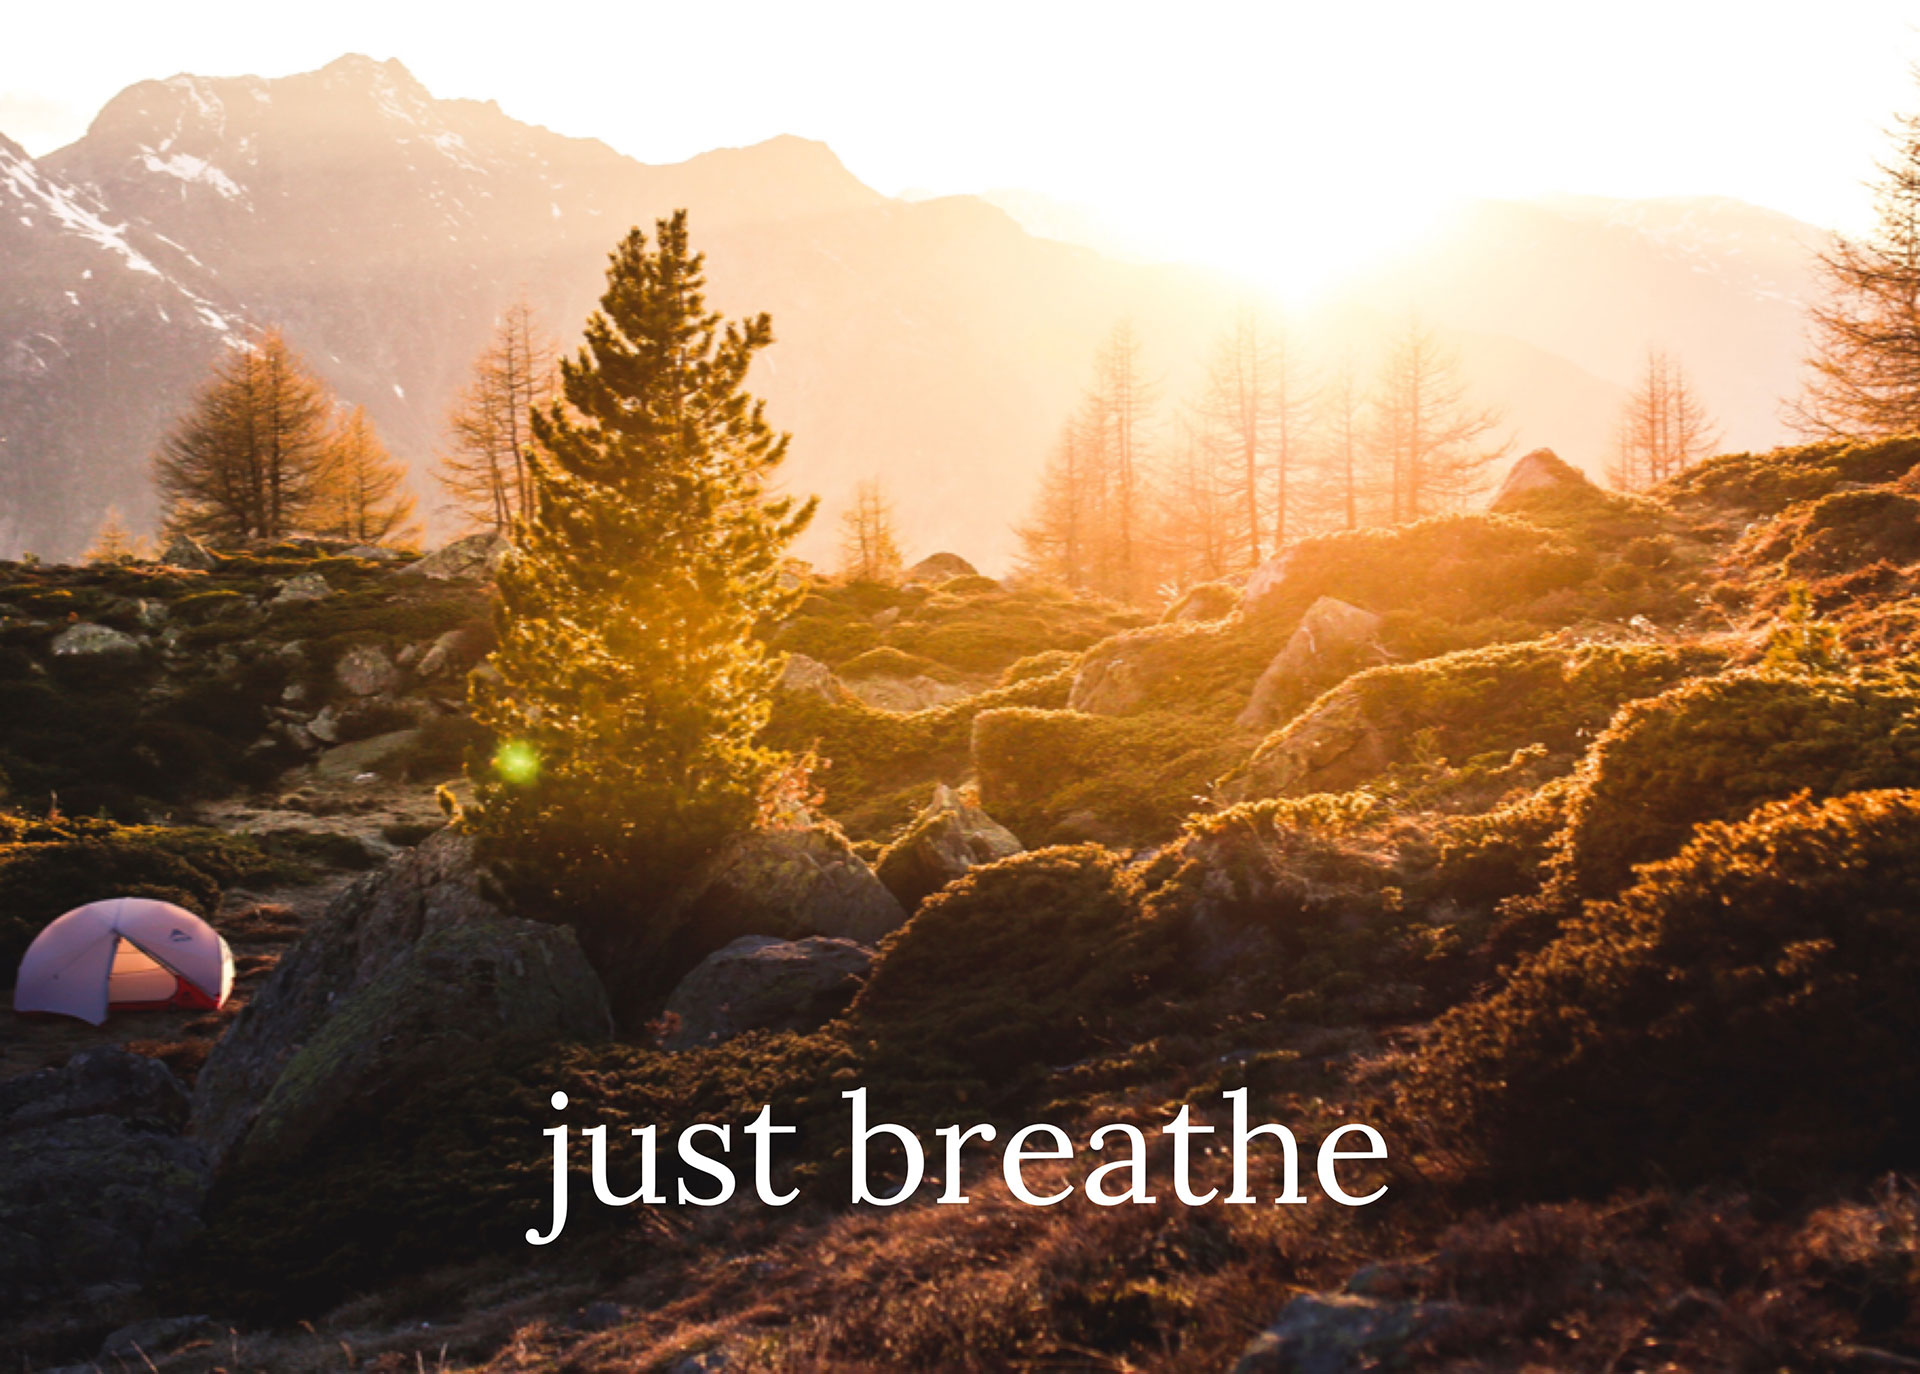 Featured Image for 'Just Breathe' Blog Post